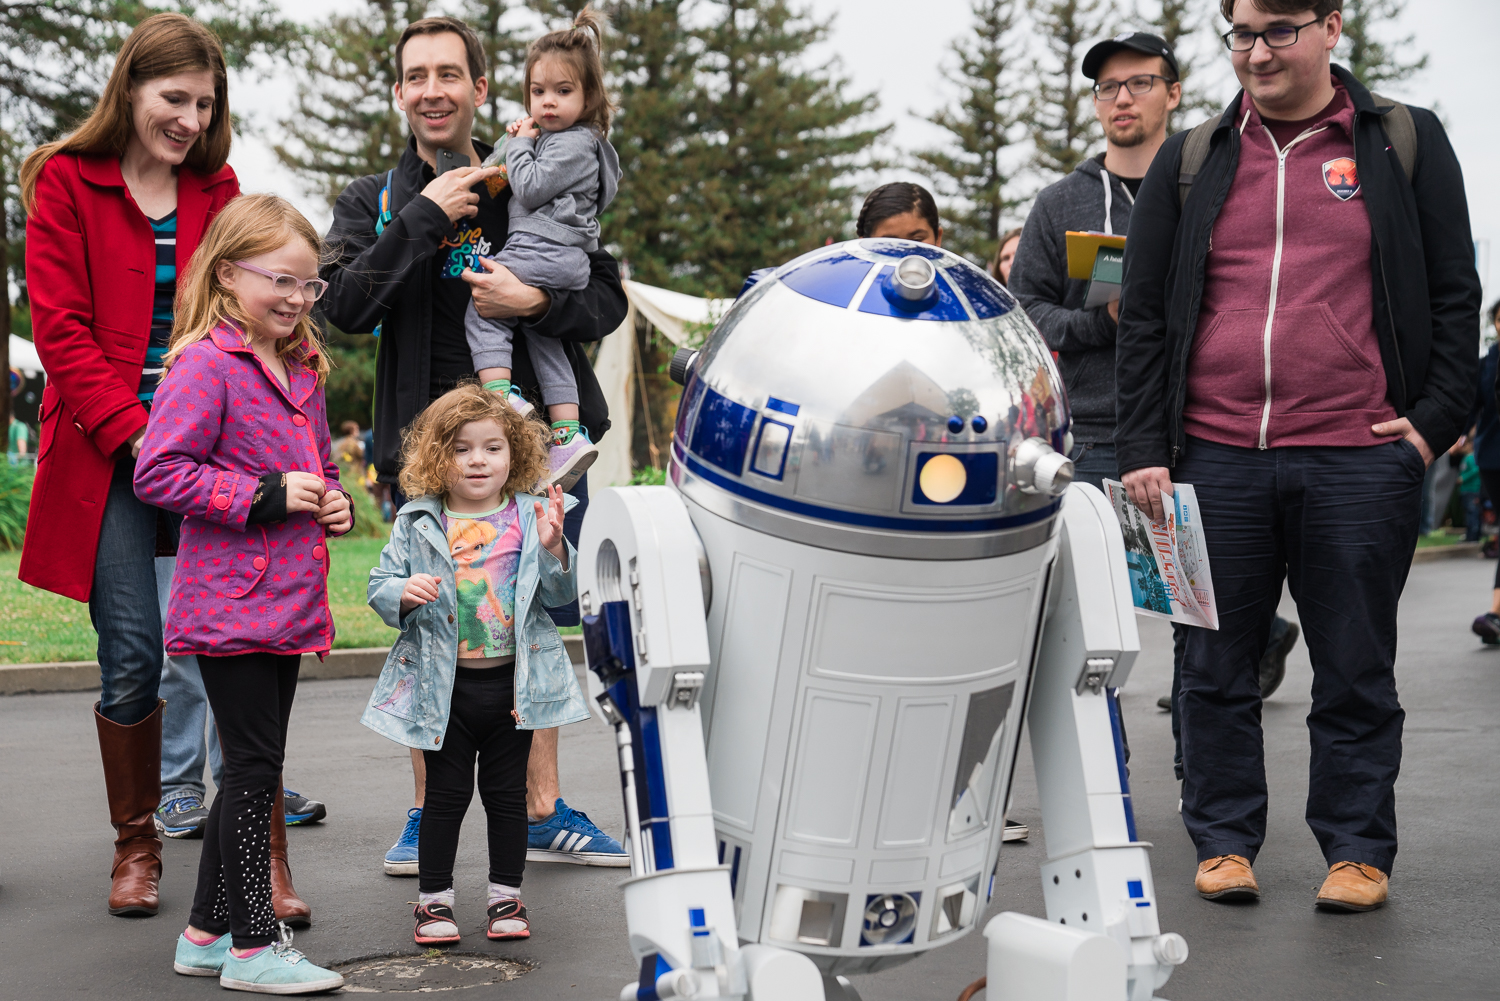 A family smiles while greeting R2D2 at Maker Faire.